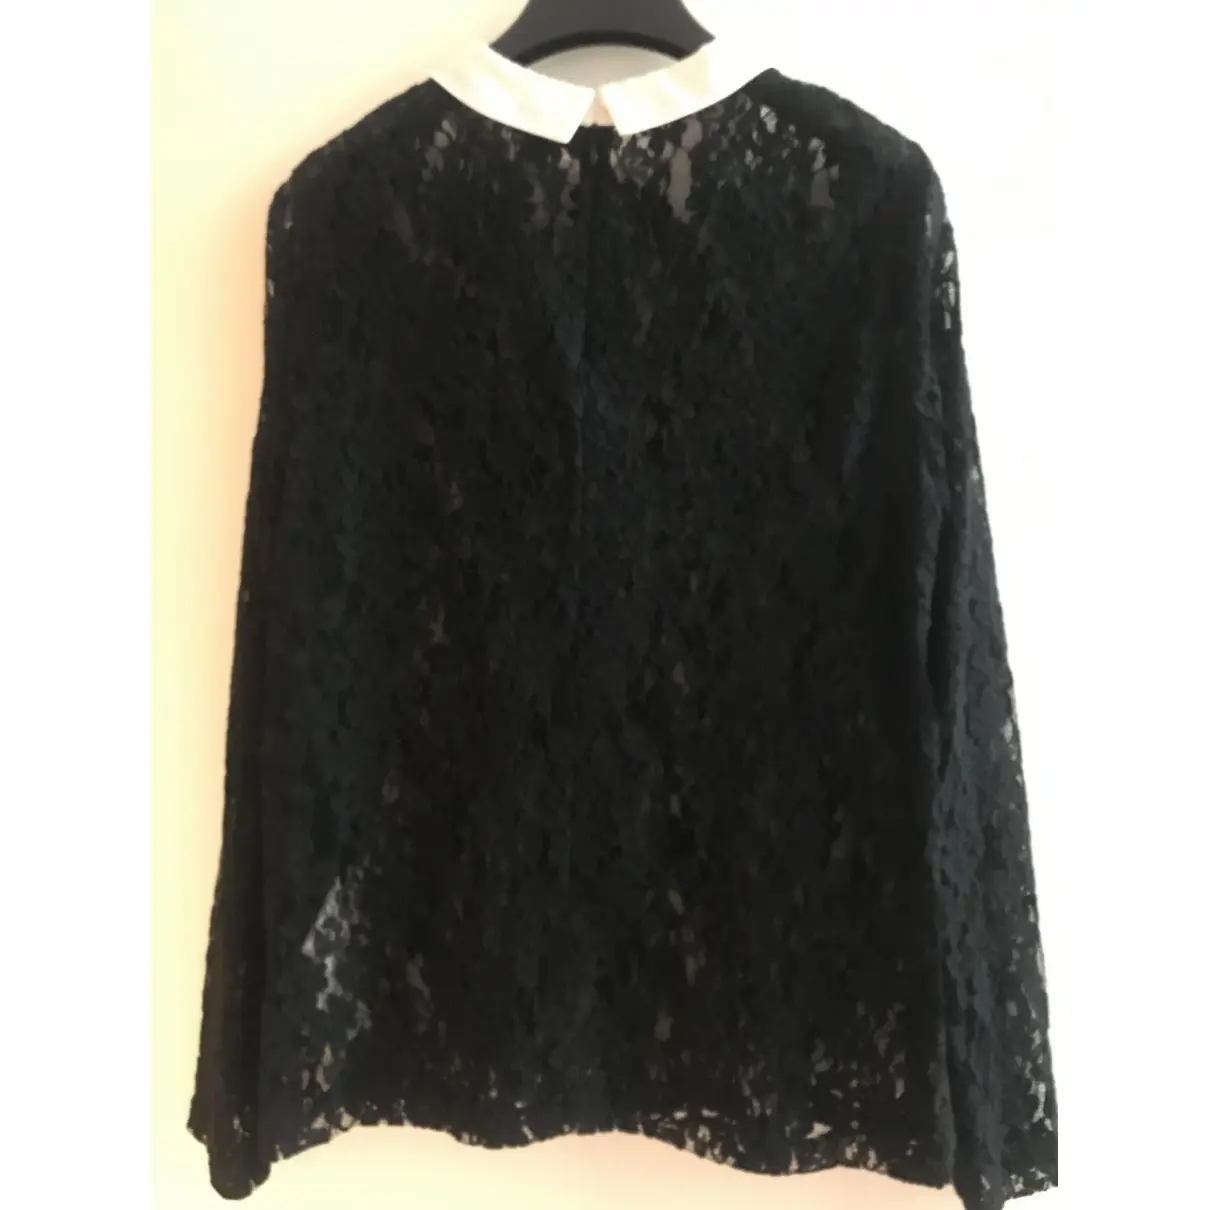 Buy Dkny Lace shirt online